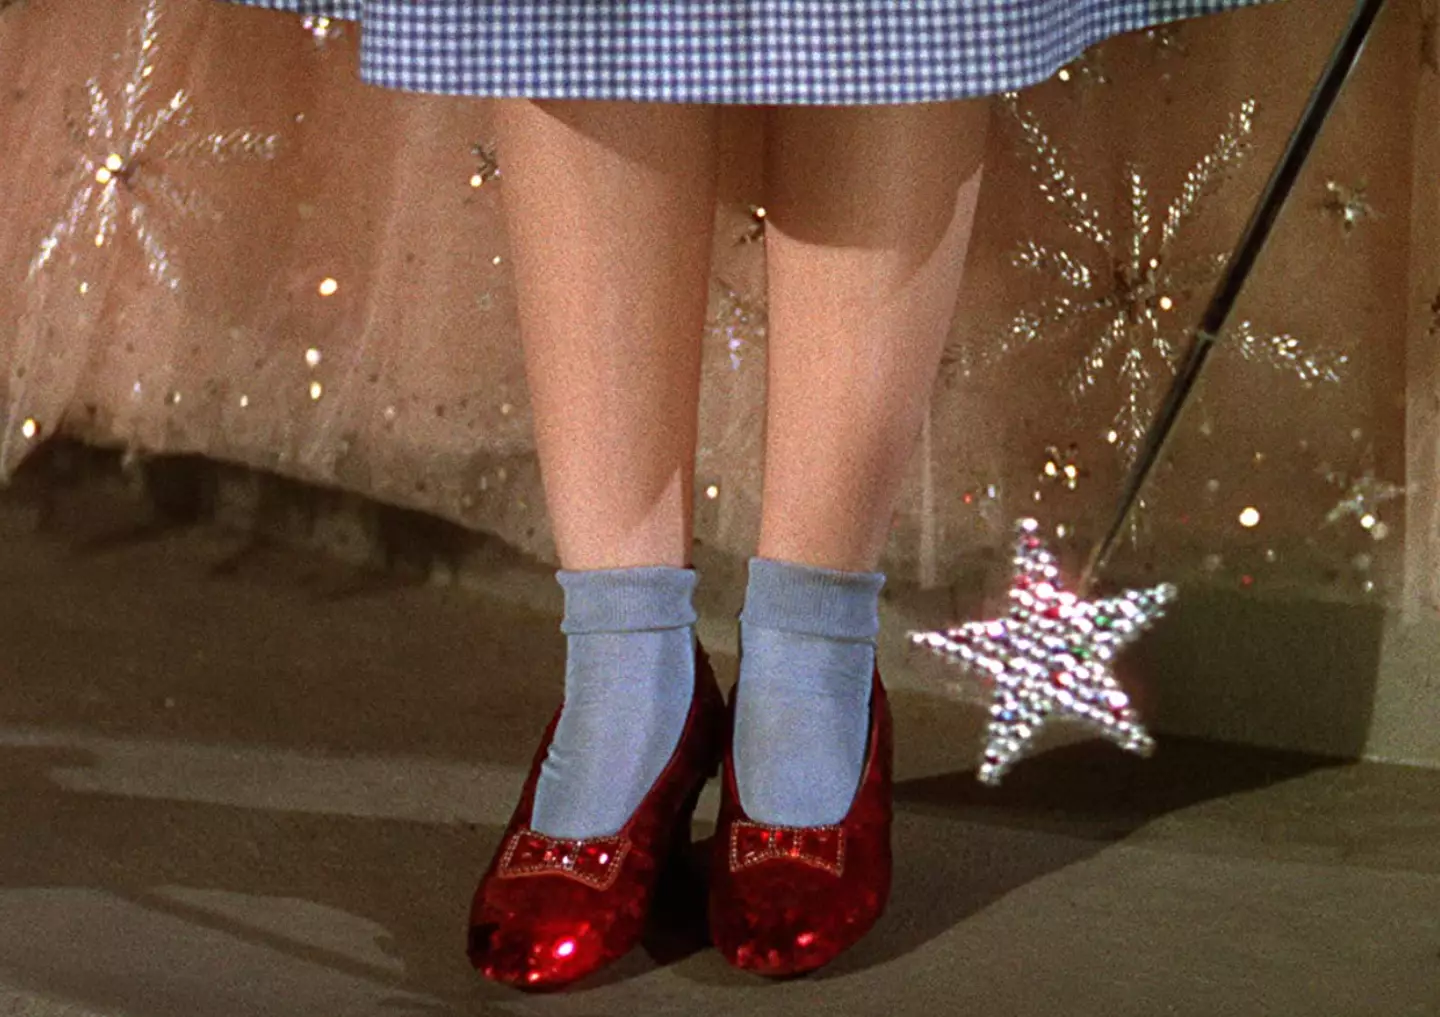 Judy Garland wore four pairs of ruby slippers during the filming of 'The Wizard of Oz'.